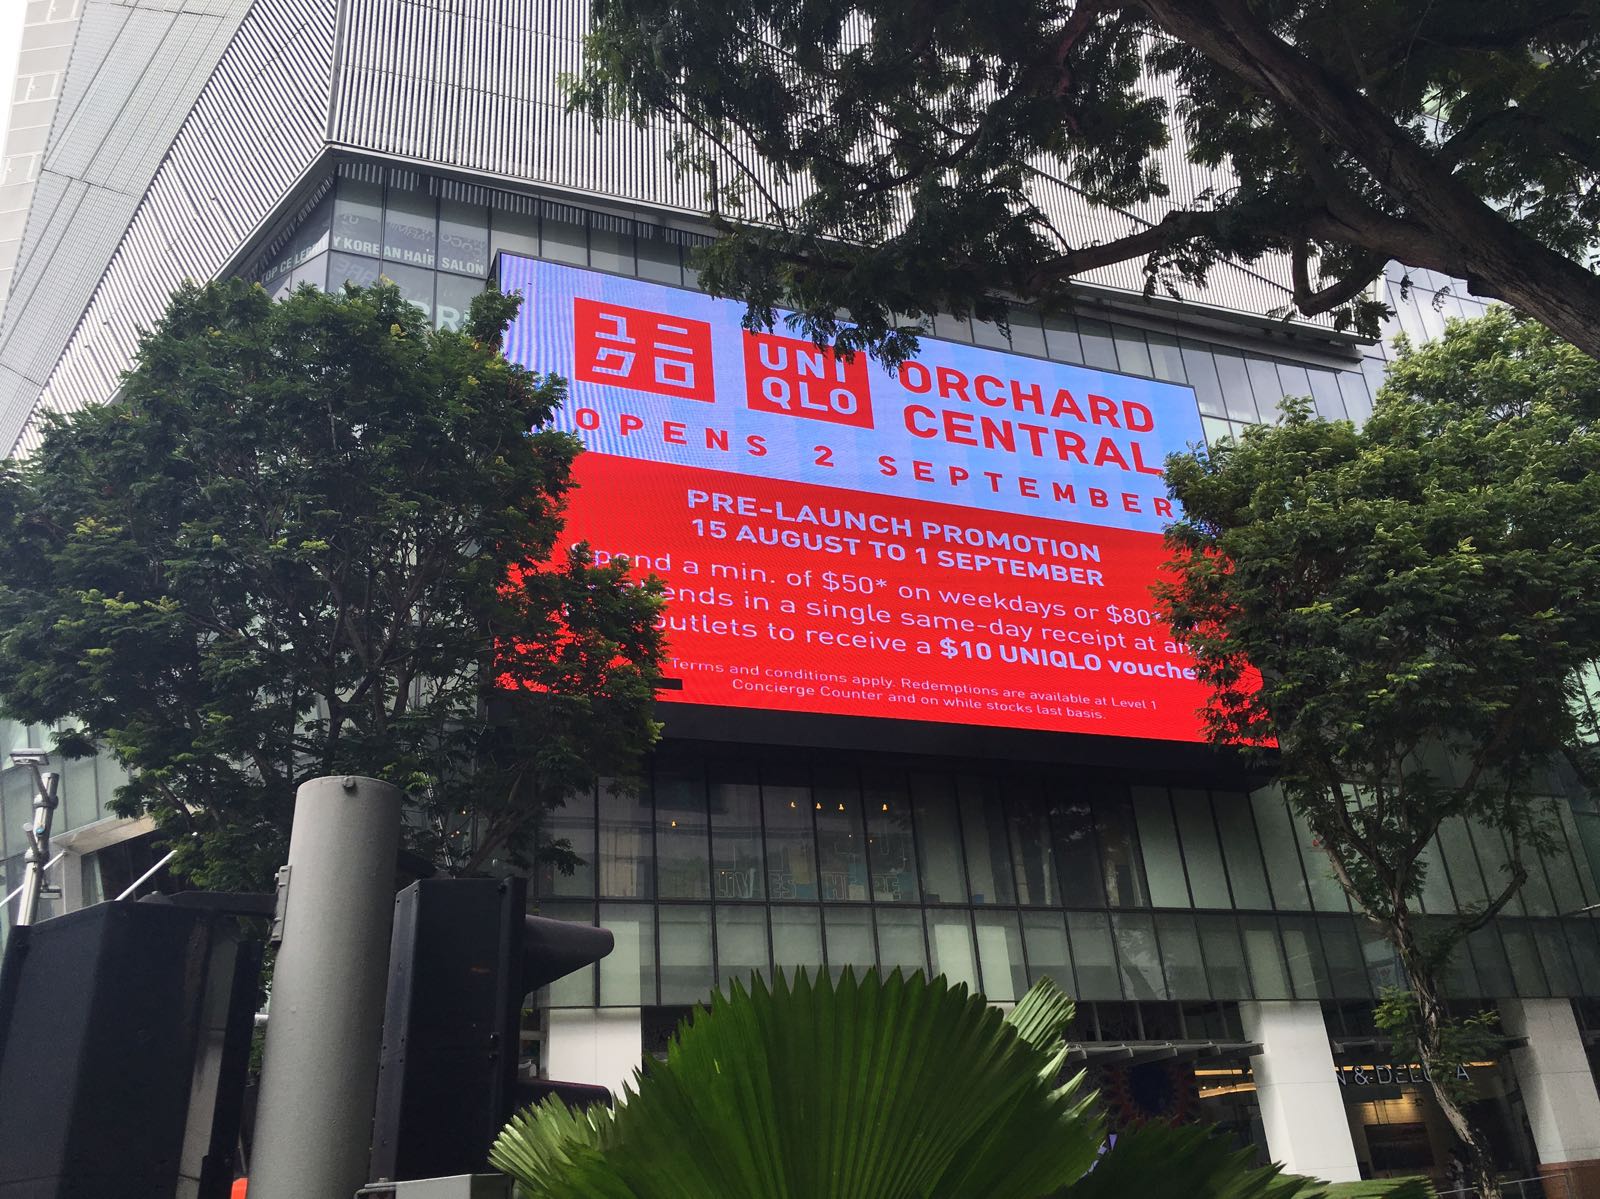 P16mm Outdoor LED Display Screen